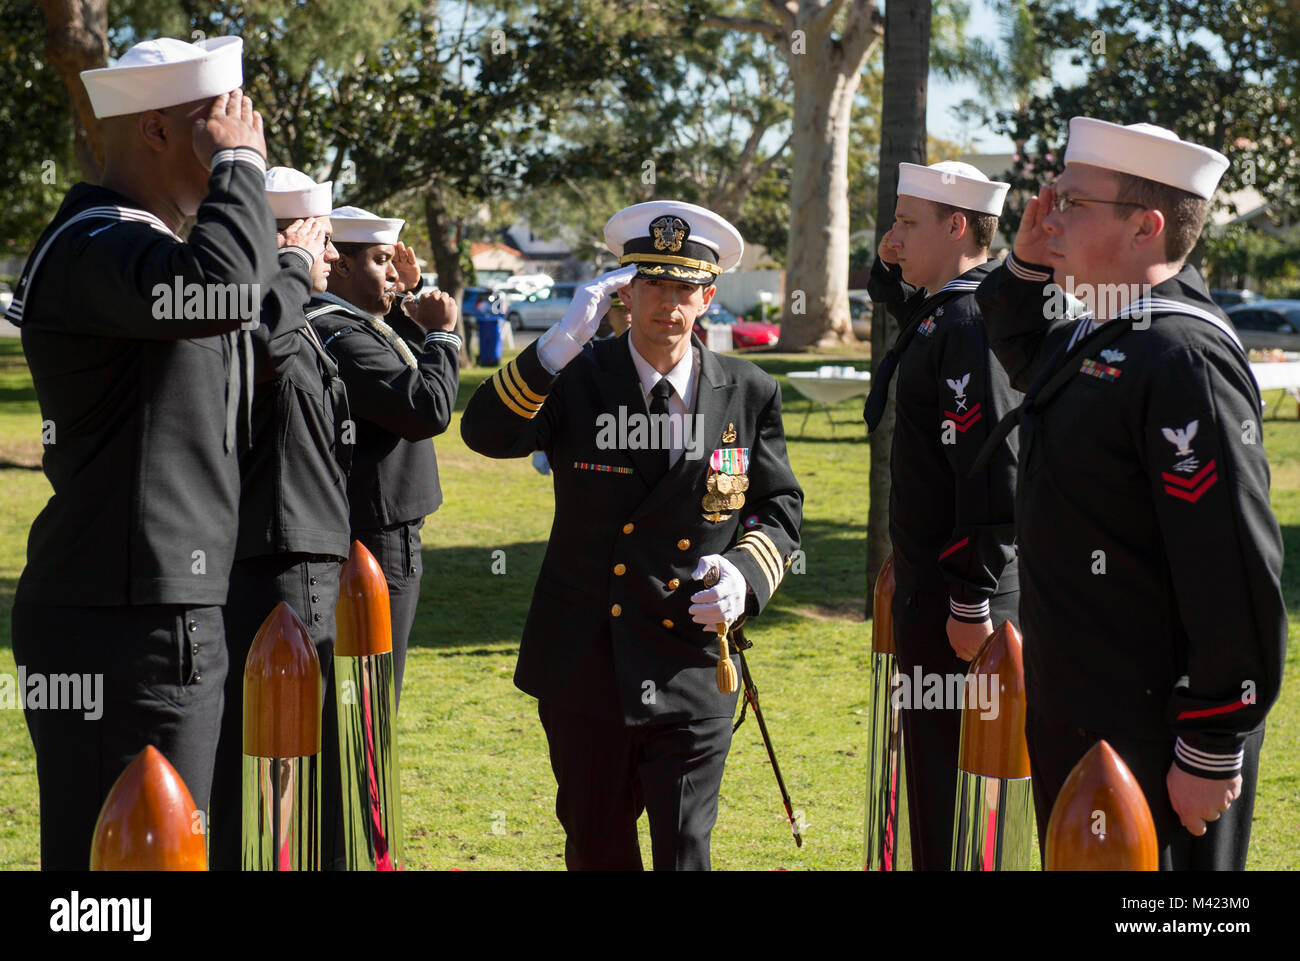 180208-N-HS117-0017  CORONADO, Calif. (Feb. 8, 2018) Cmdr John C. Laney, deputy commander, Mine Countermeasures Division (MCMDIV) 31, salutes sideboys as the official party arrives for the MCMDIV 31 change of command ceremony at Spreckels Park. During the ceremony, Cmdr John C. Laney relieved Cmdr. Don M. McNeil as commander of MCMDIV 31. (U.S. Navy photo by Mass Communication Specialist Seaman Apprentice Jeffery L. Southerland/Released) Stock Photo